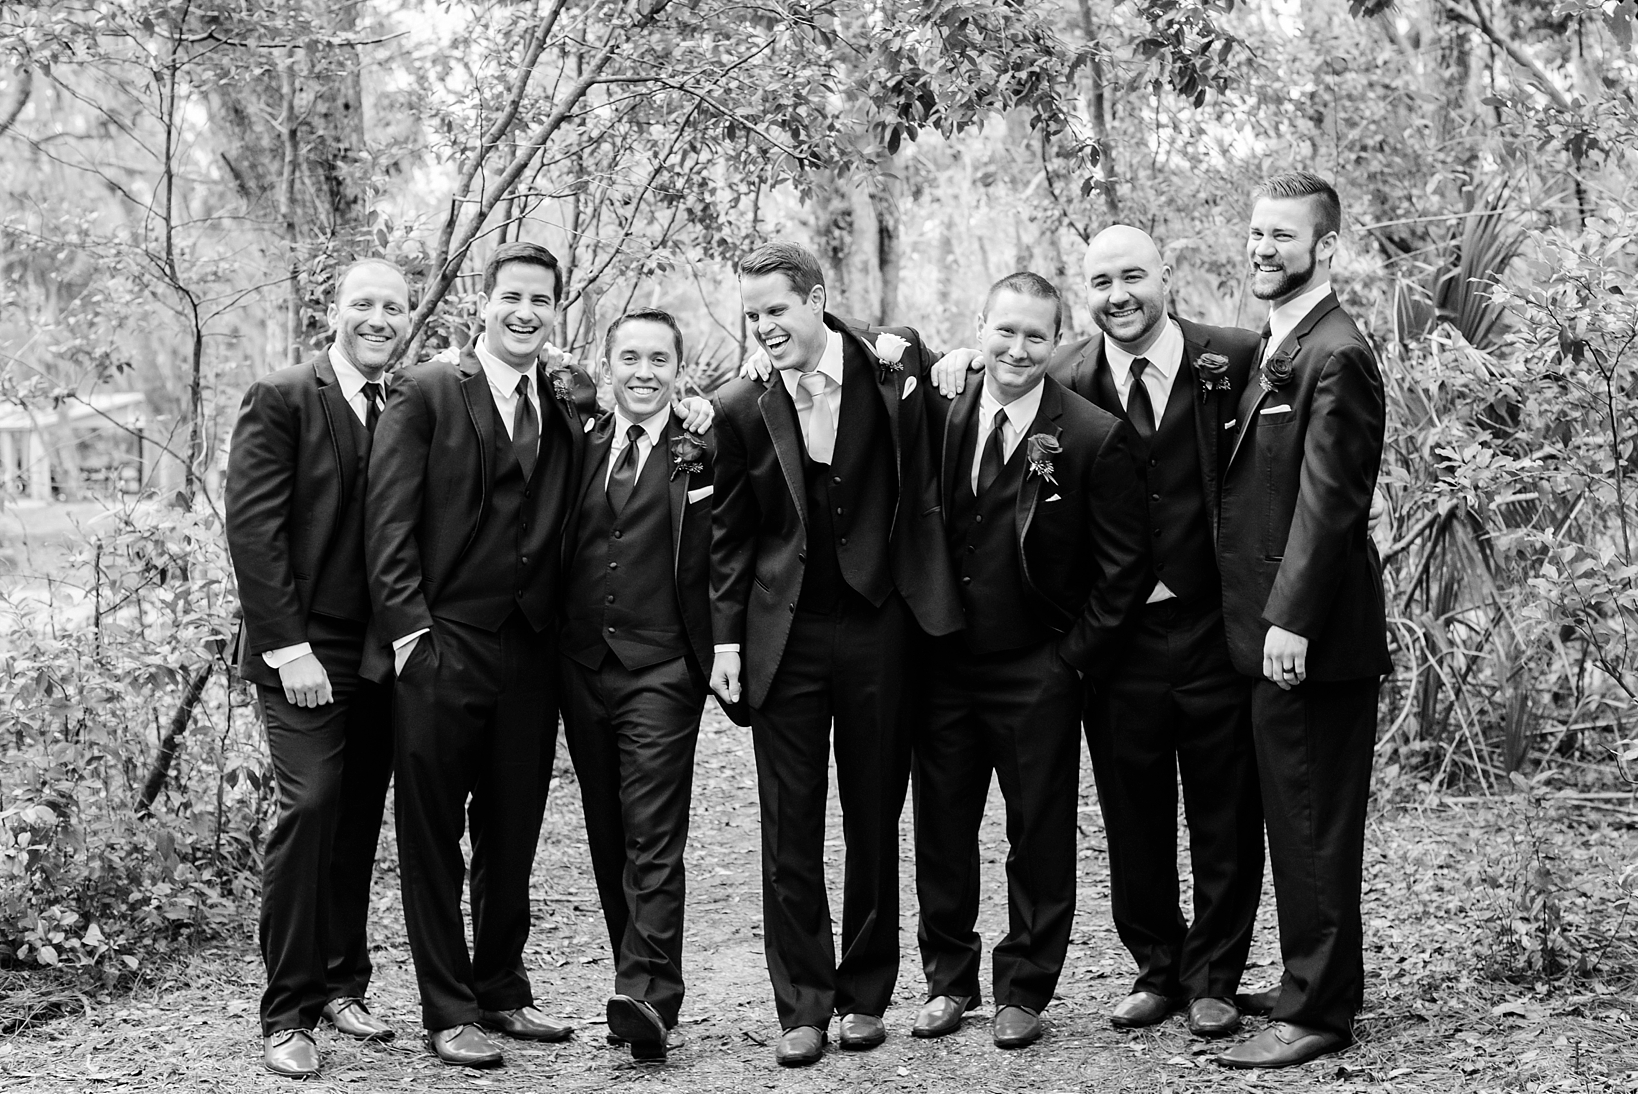 Groom and his Groomsmen sharing a laugh after the wedding ceremony by Sarah & Ben Photography. Check out all our work at www.sarahben.com